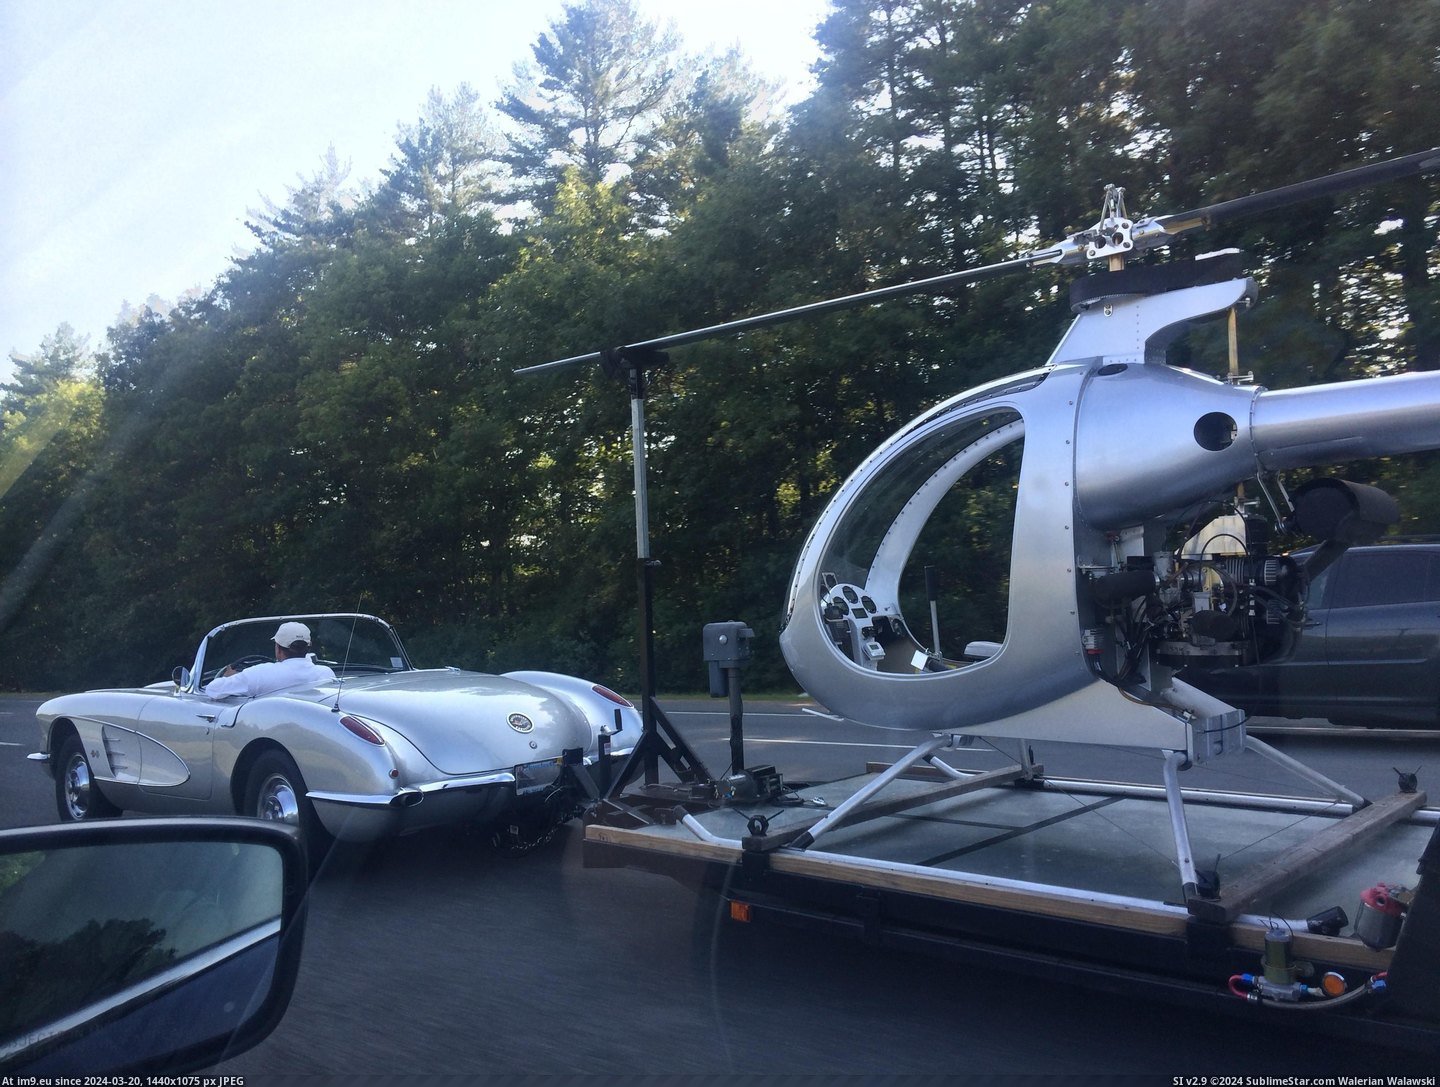 #Guy #Life #Towing #Corvette #Helicopter #Winning [Pics] 50's corvette towing a helicopter. this guy is winning at life. Pic. (Image of album My r/PICS favs))